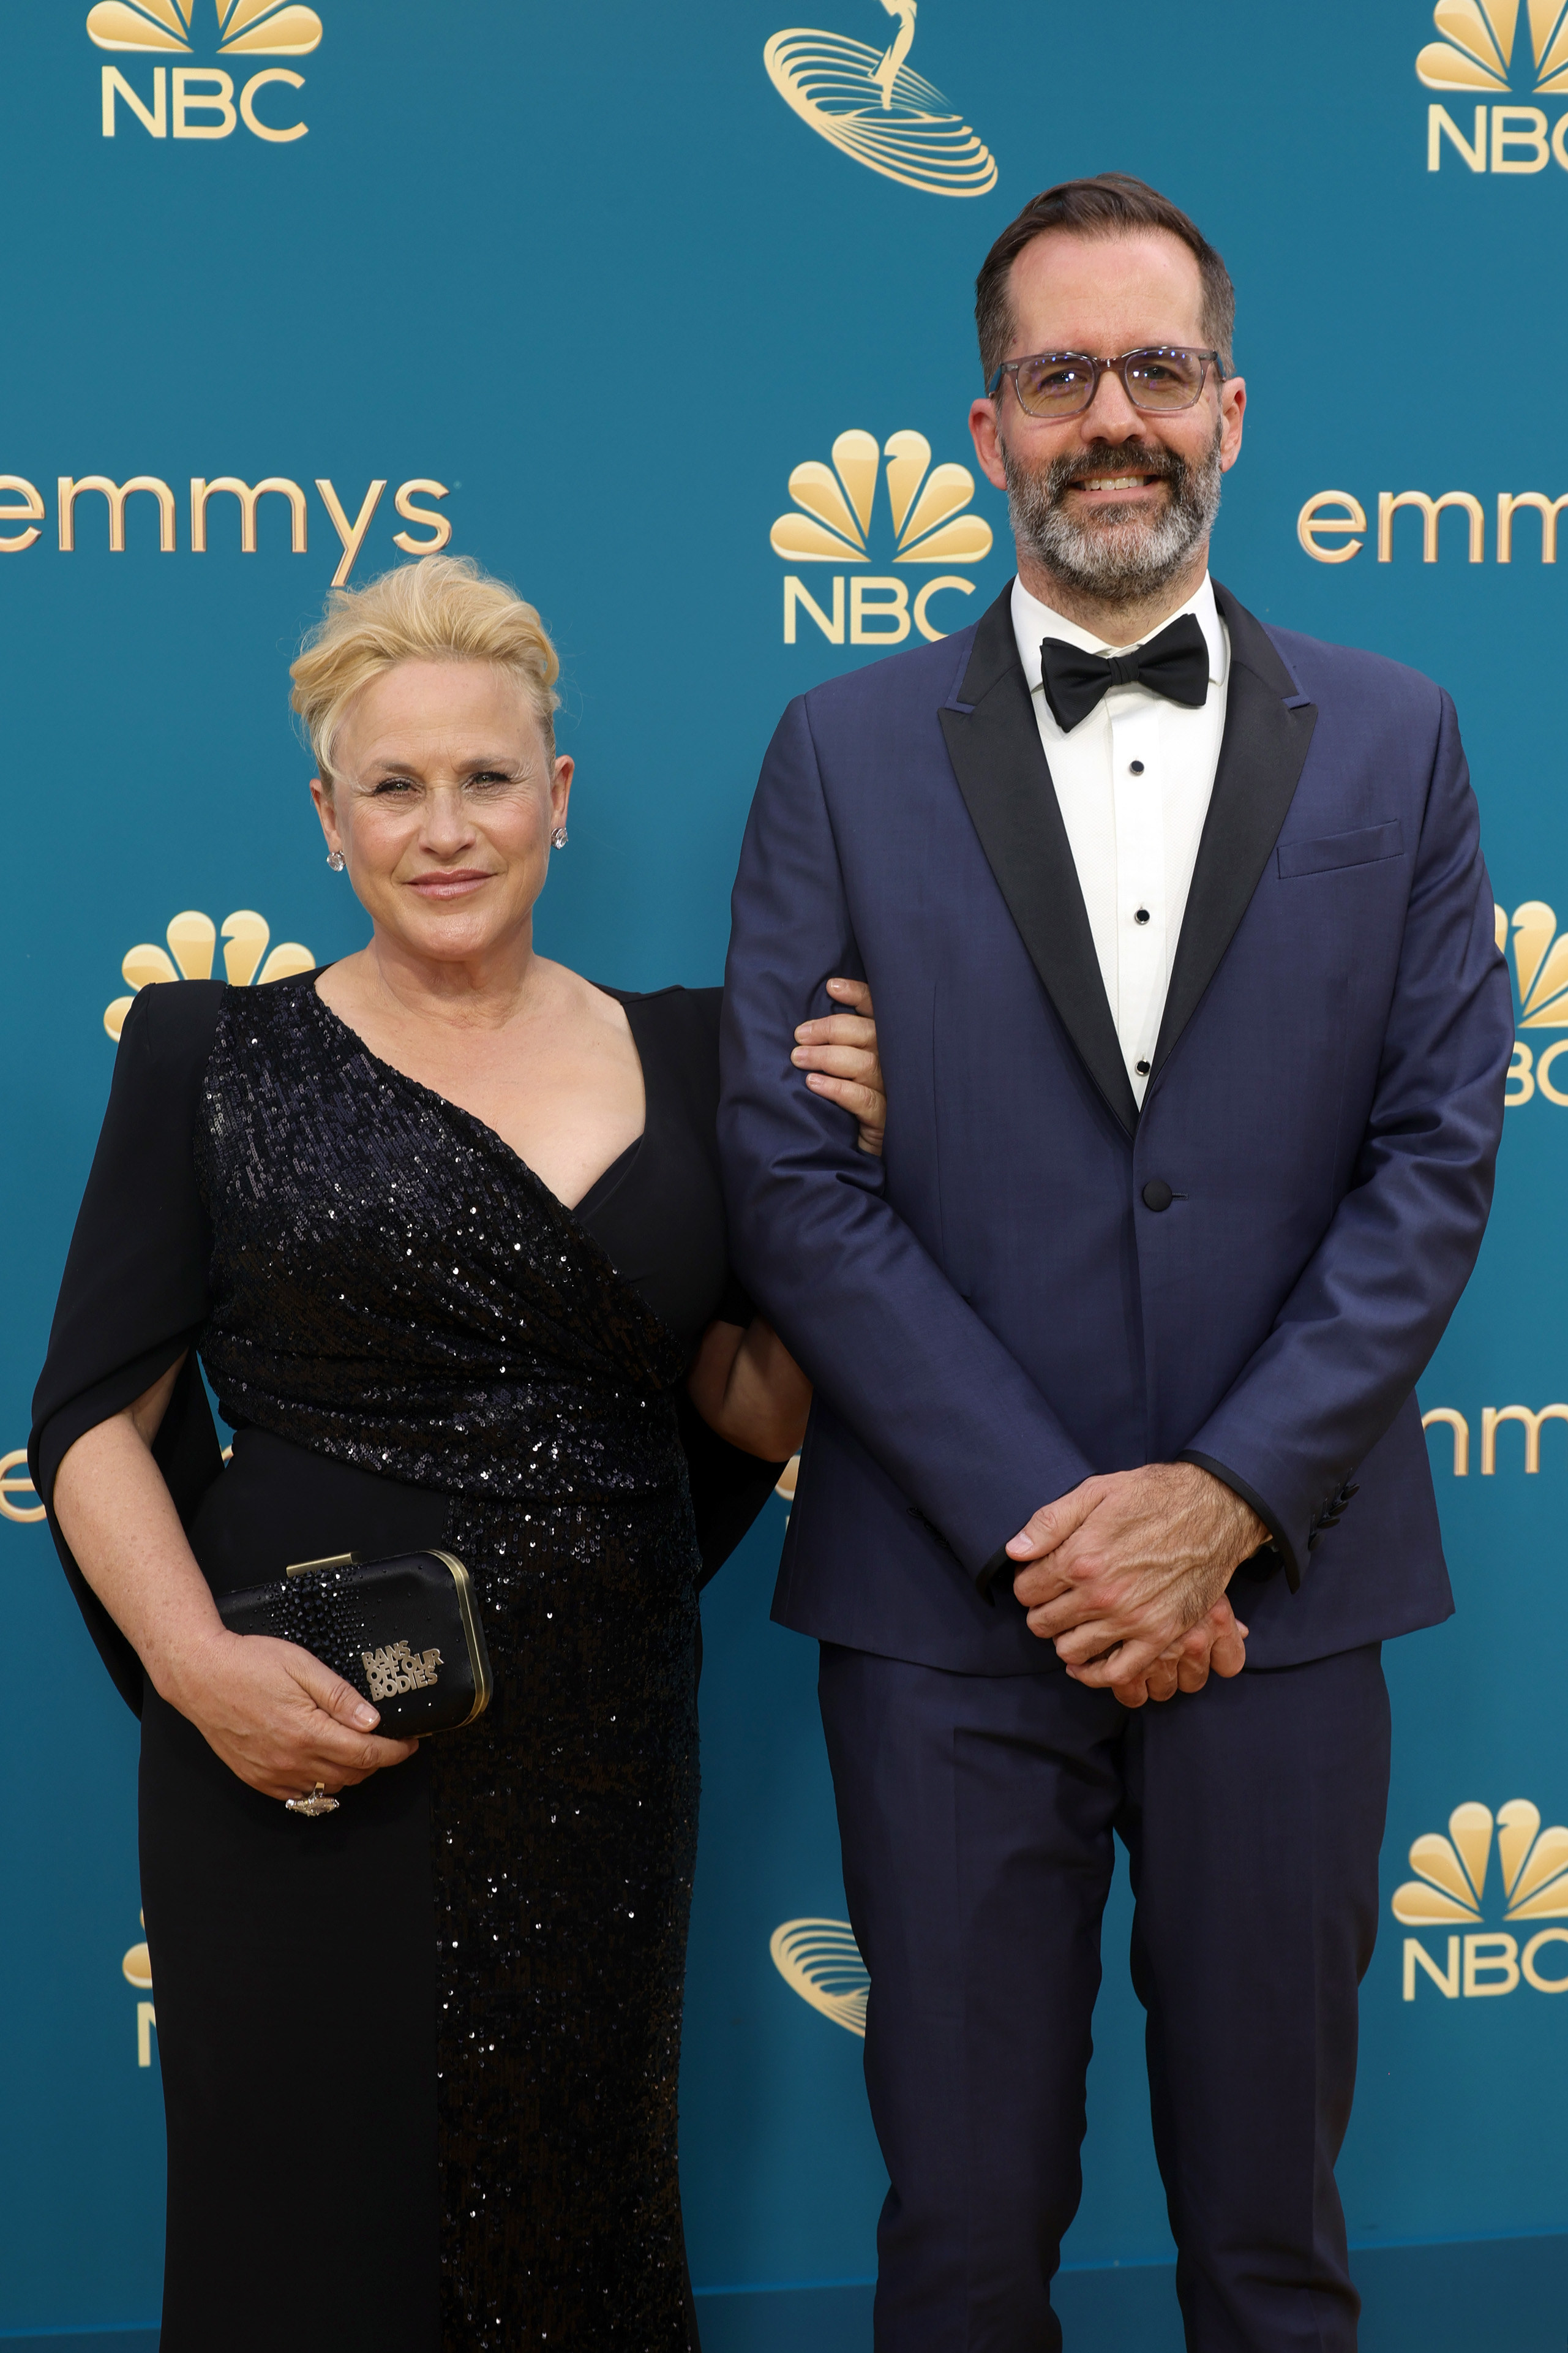 Patricia Arquette in a black sequined dress and Eric White in a black and blue tux